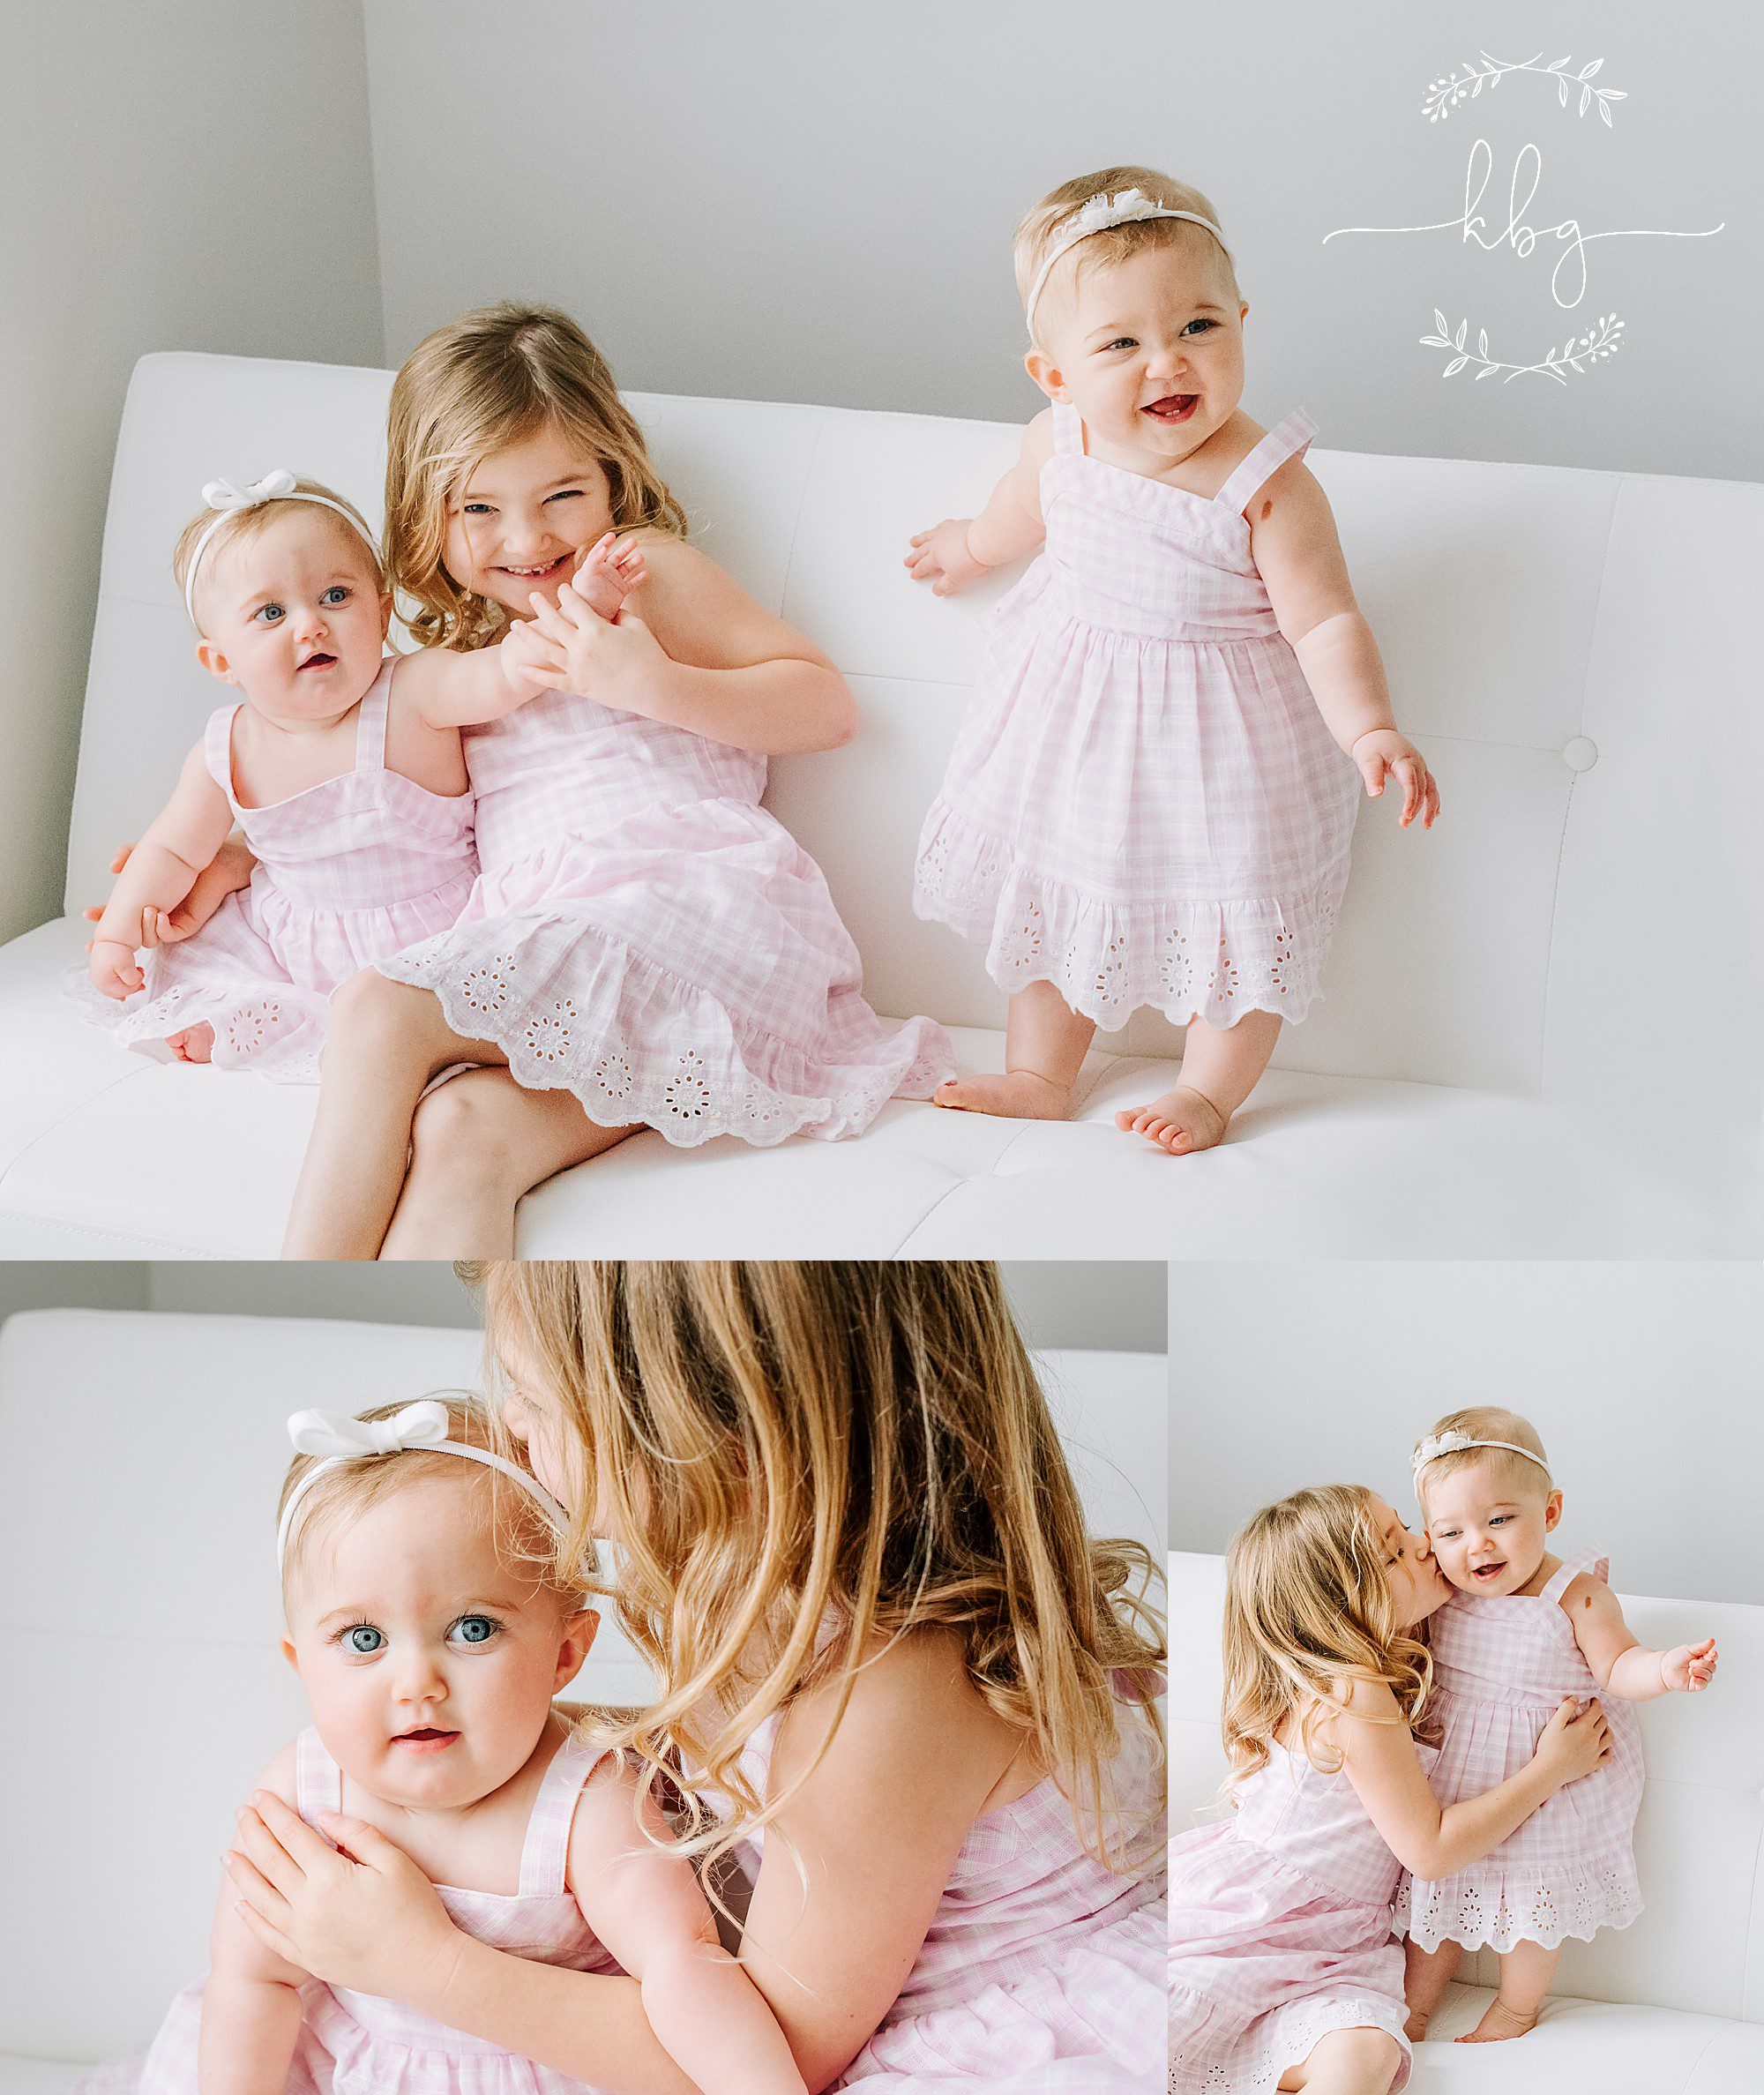 big sister playing with baby sisters on the couch in studio - marietta studio photographer